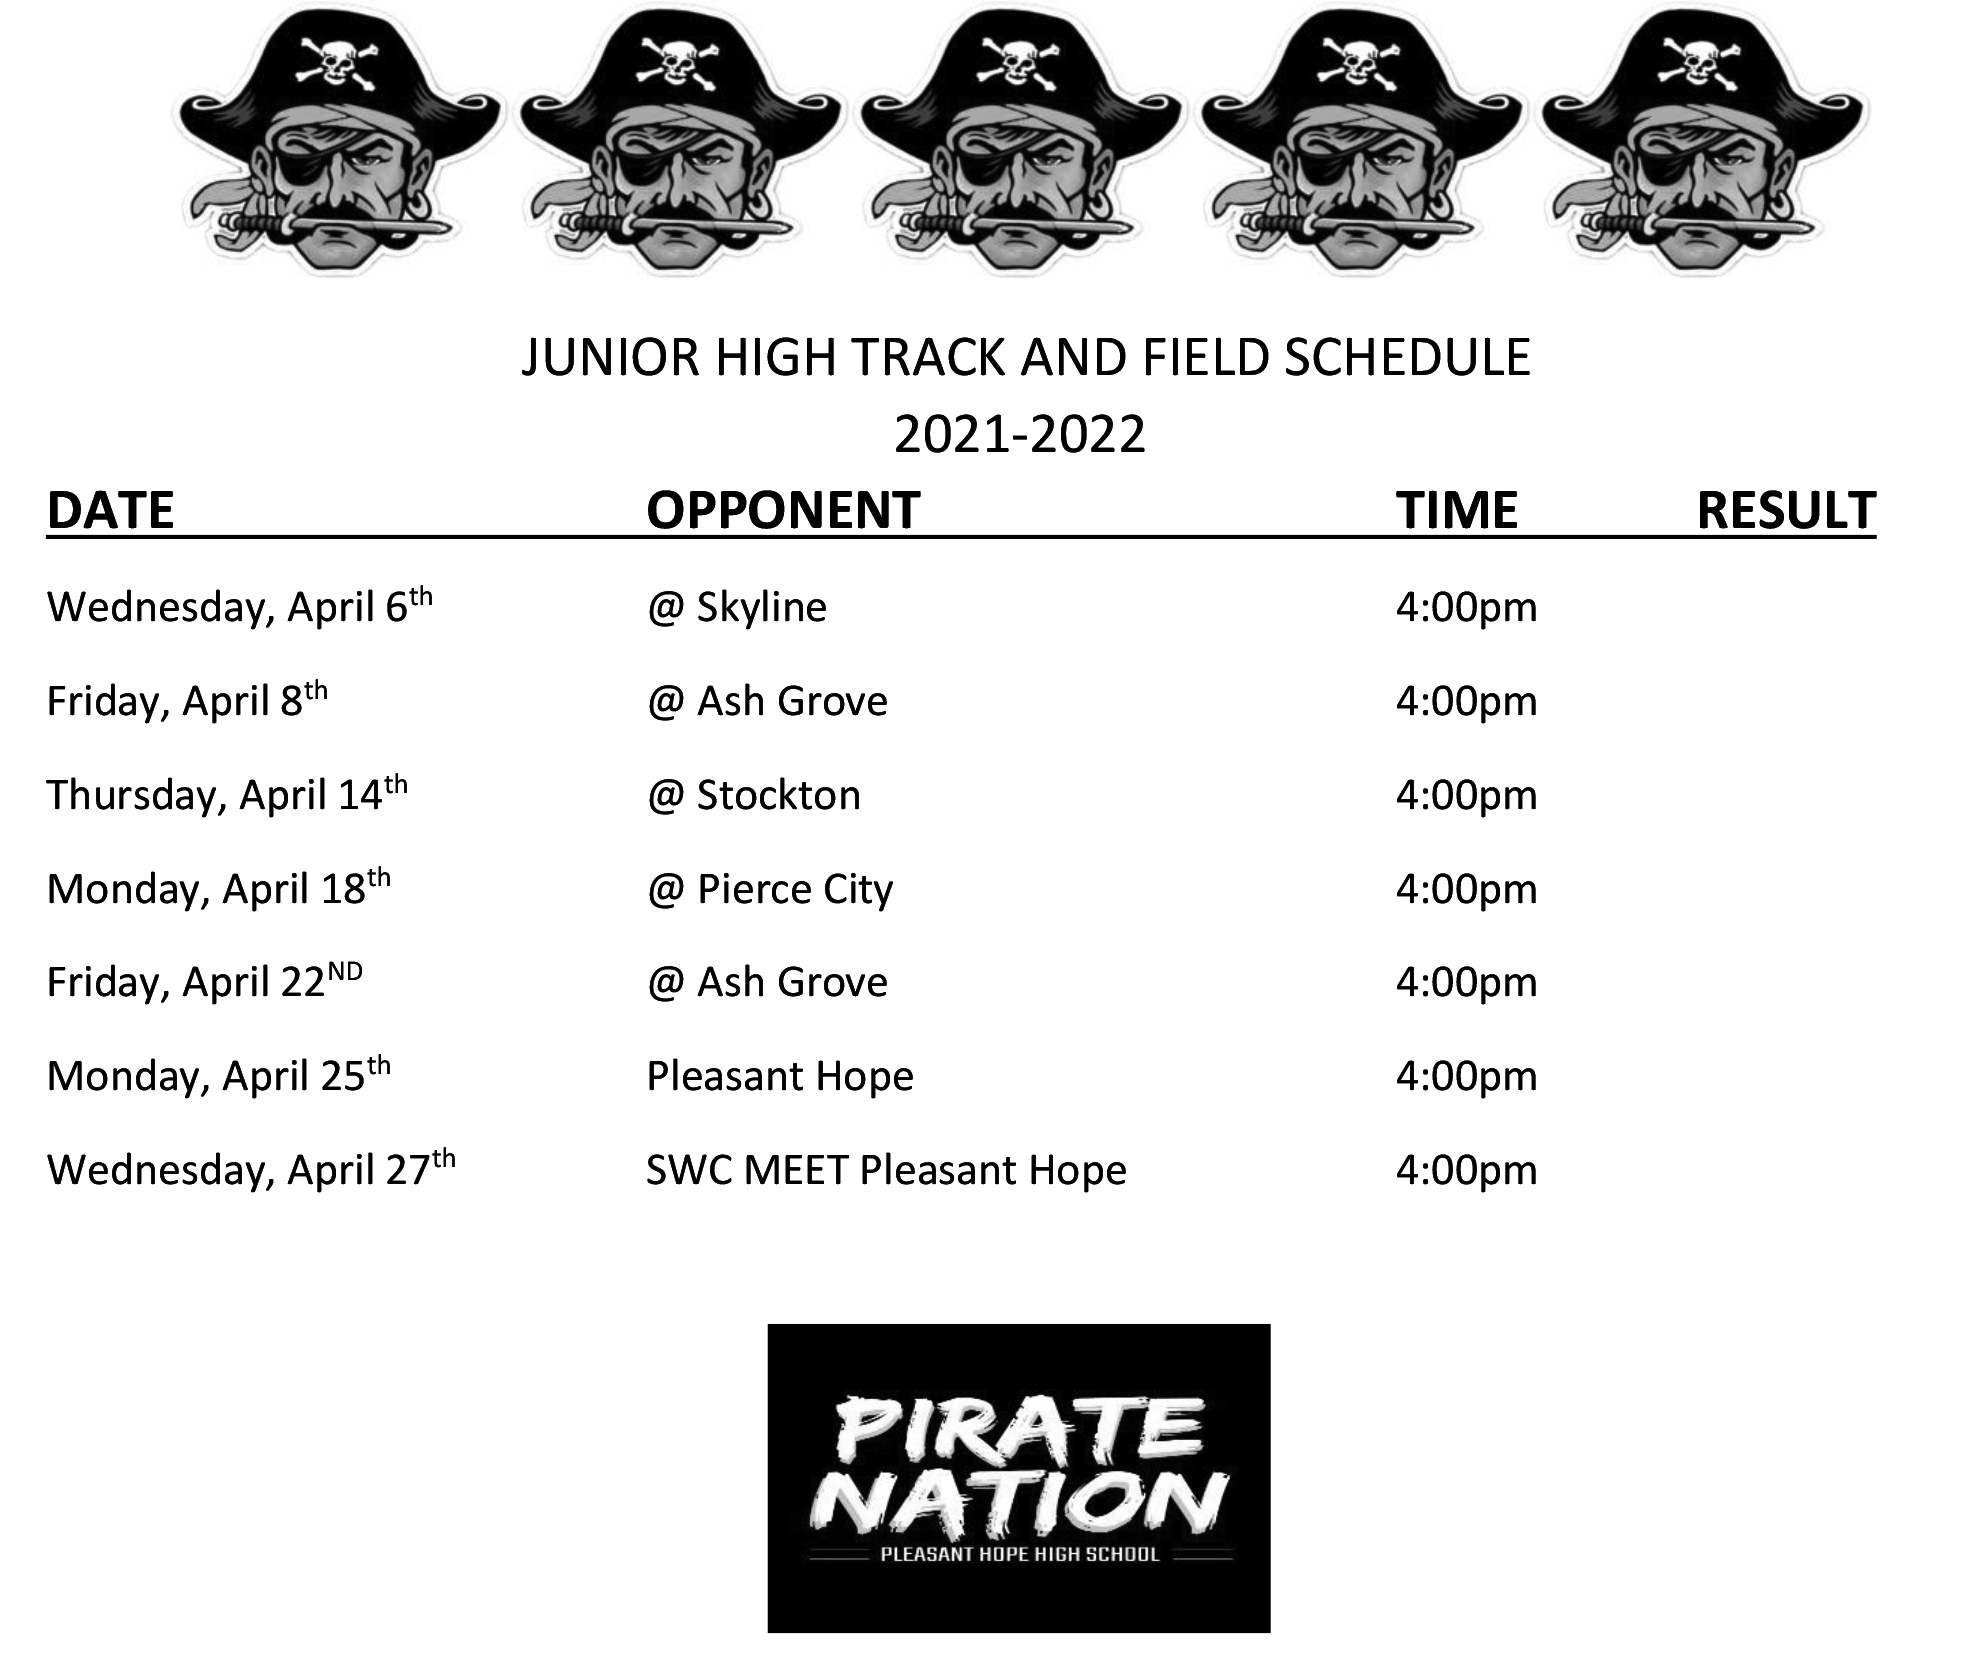 MS Track Schedule